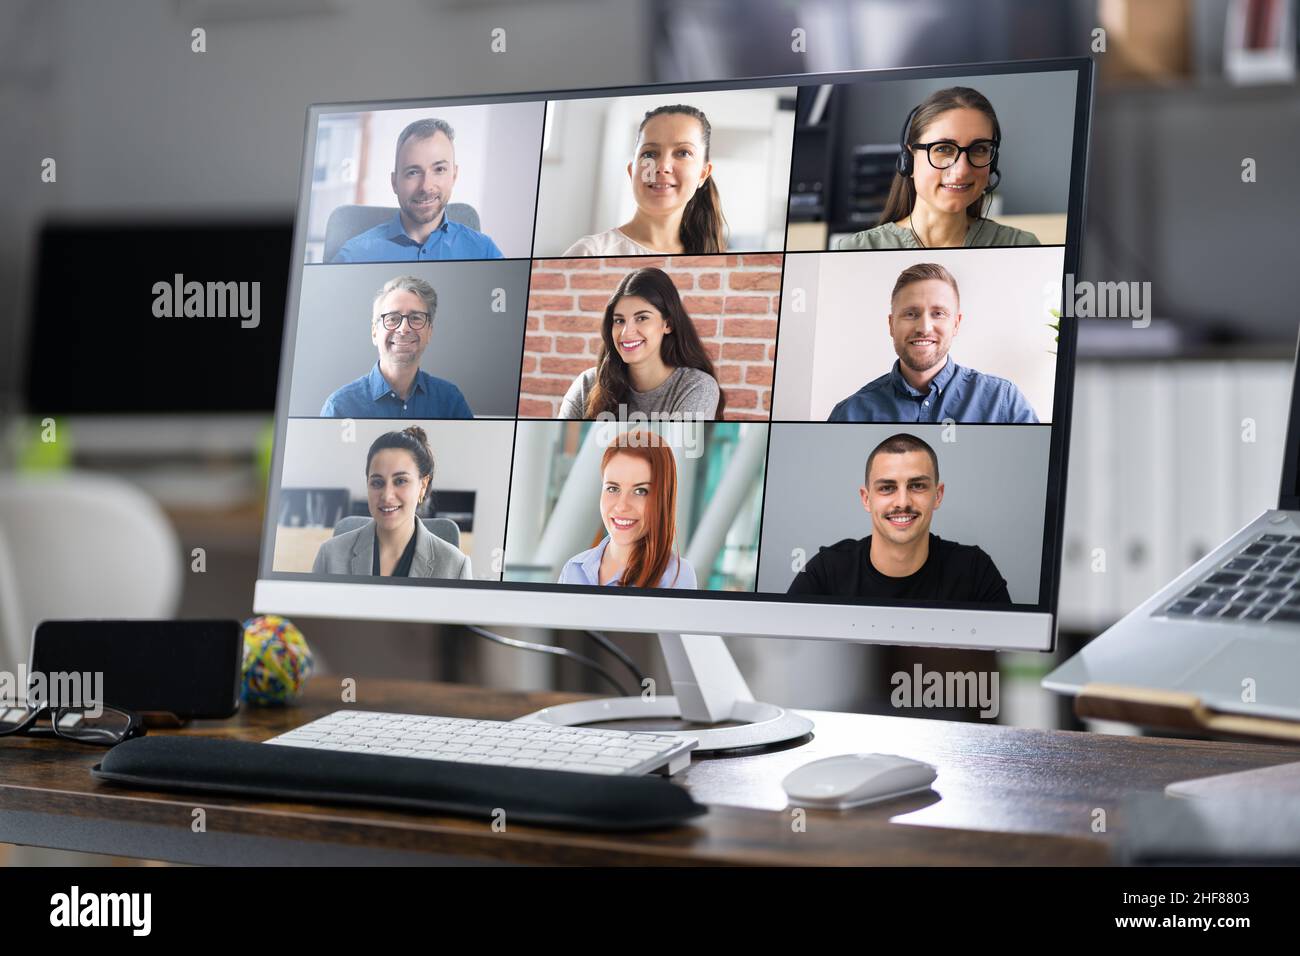 Online Video Conference Webinar Call With Team Stock Photo